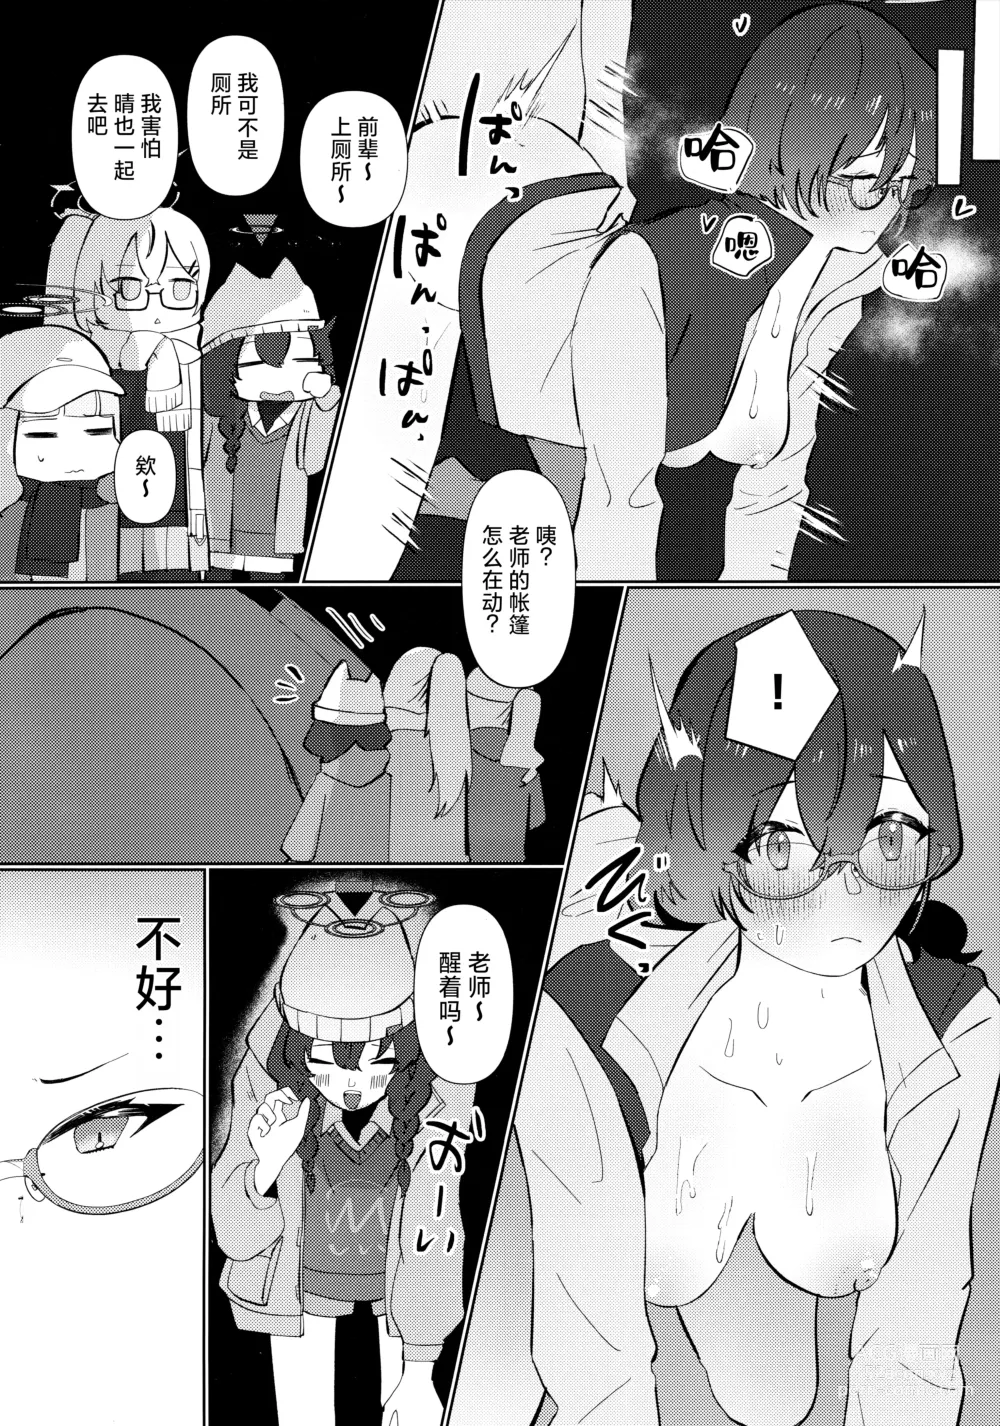 Page 14 of doujinshi 夜半时分的骇入